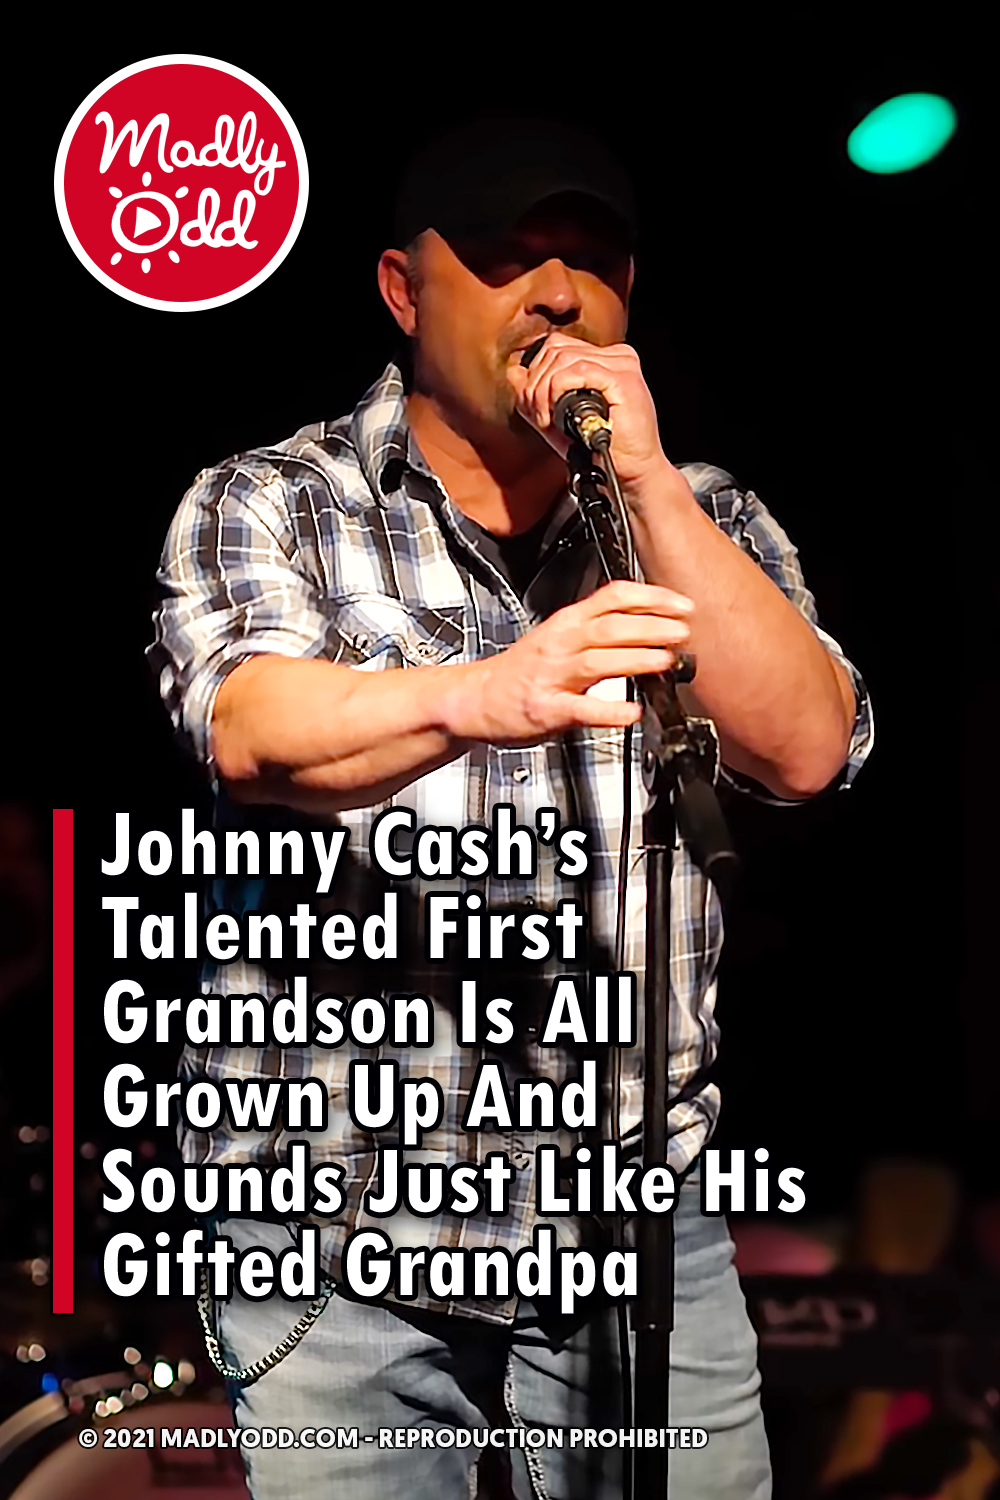 Johnny Cash’s Talented First Grandson Is All Grown Up And Sounds Just Like His Gifted Grandpa